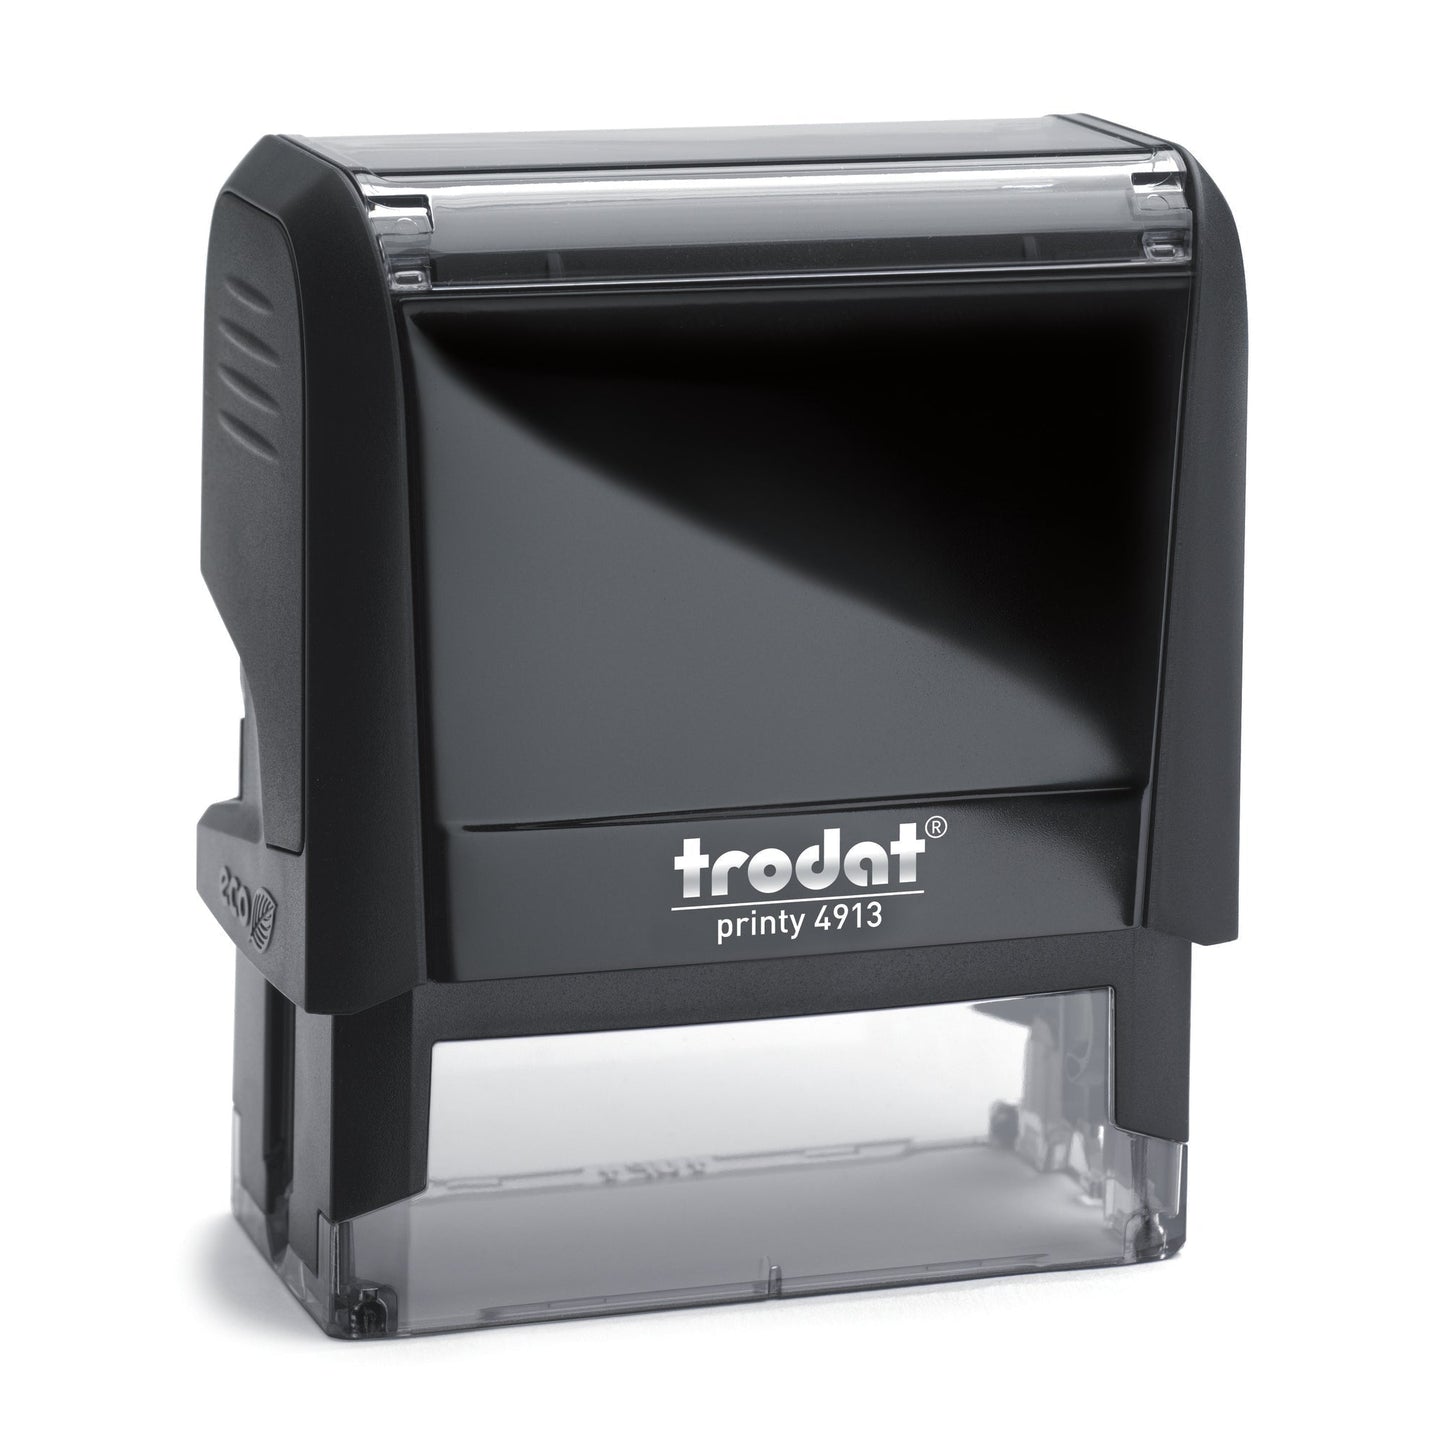 Independent Serviced To Manufacturers Schedule - Self Inking Rubber Stamp - Trodat 4913 - 55mm x 21mm Impression